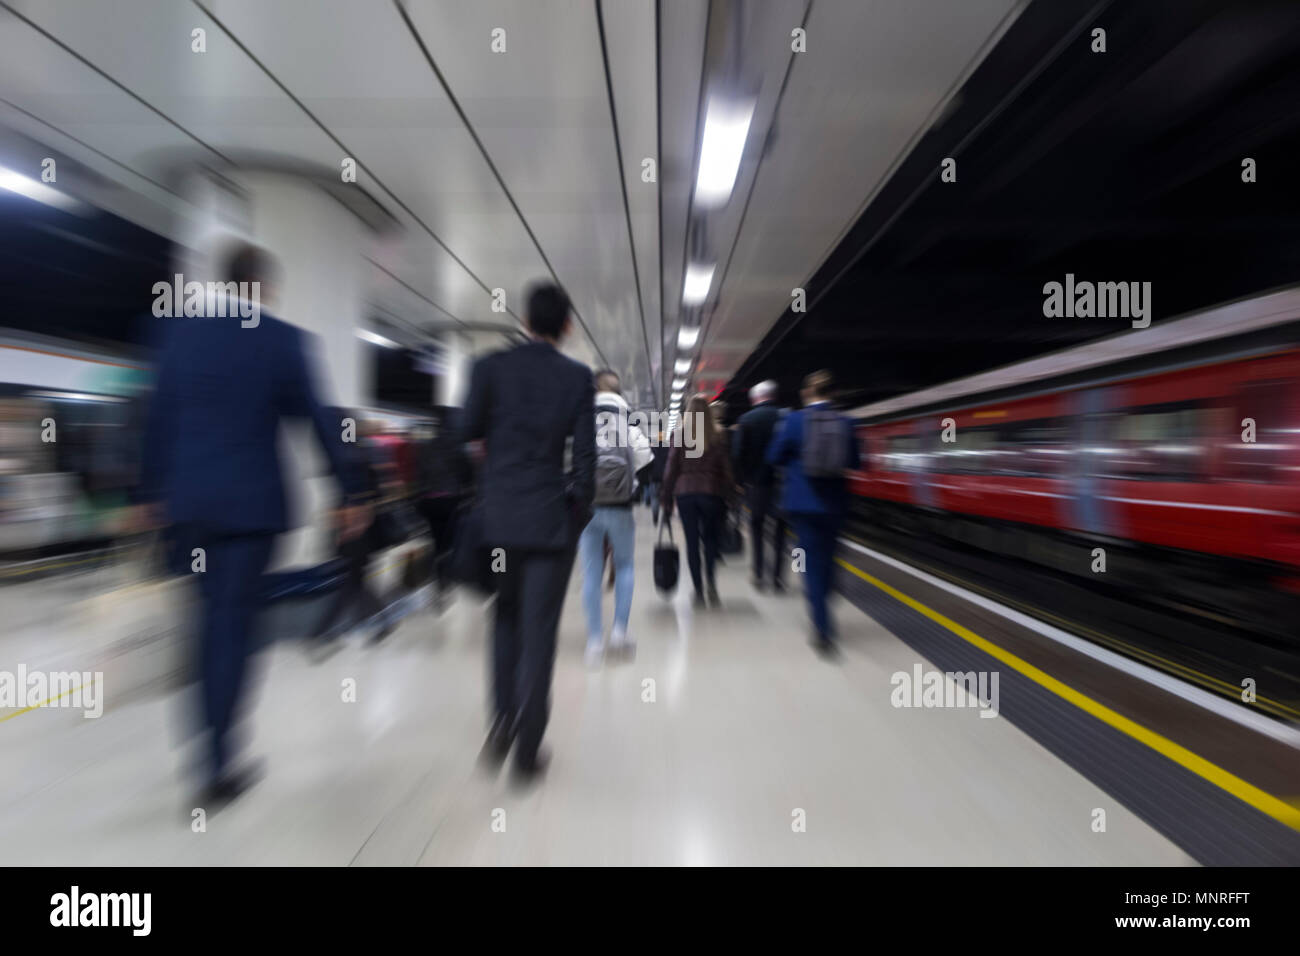 Commuters racing to work on the platform of a London station once the train pulls in Stock Photo